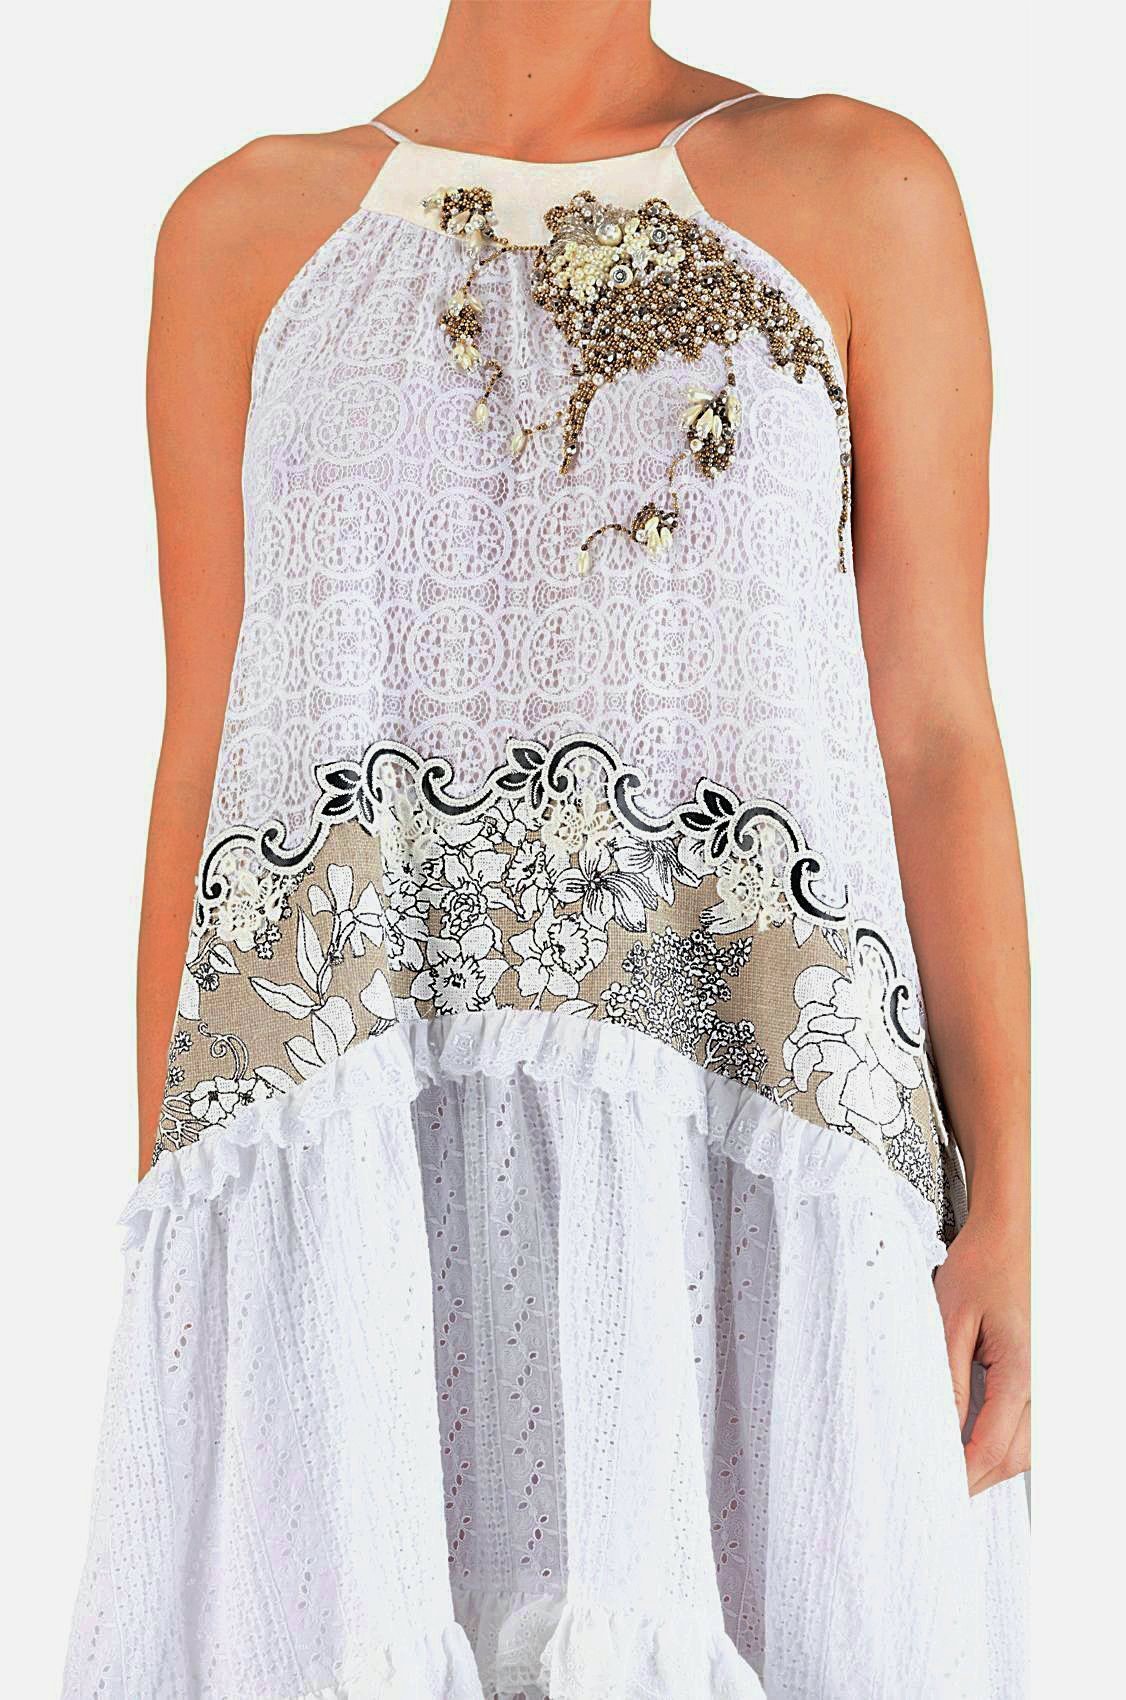 Pearls White Dress - 85% off